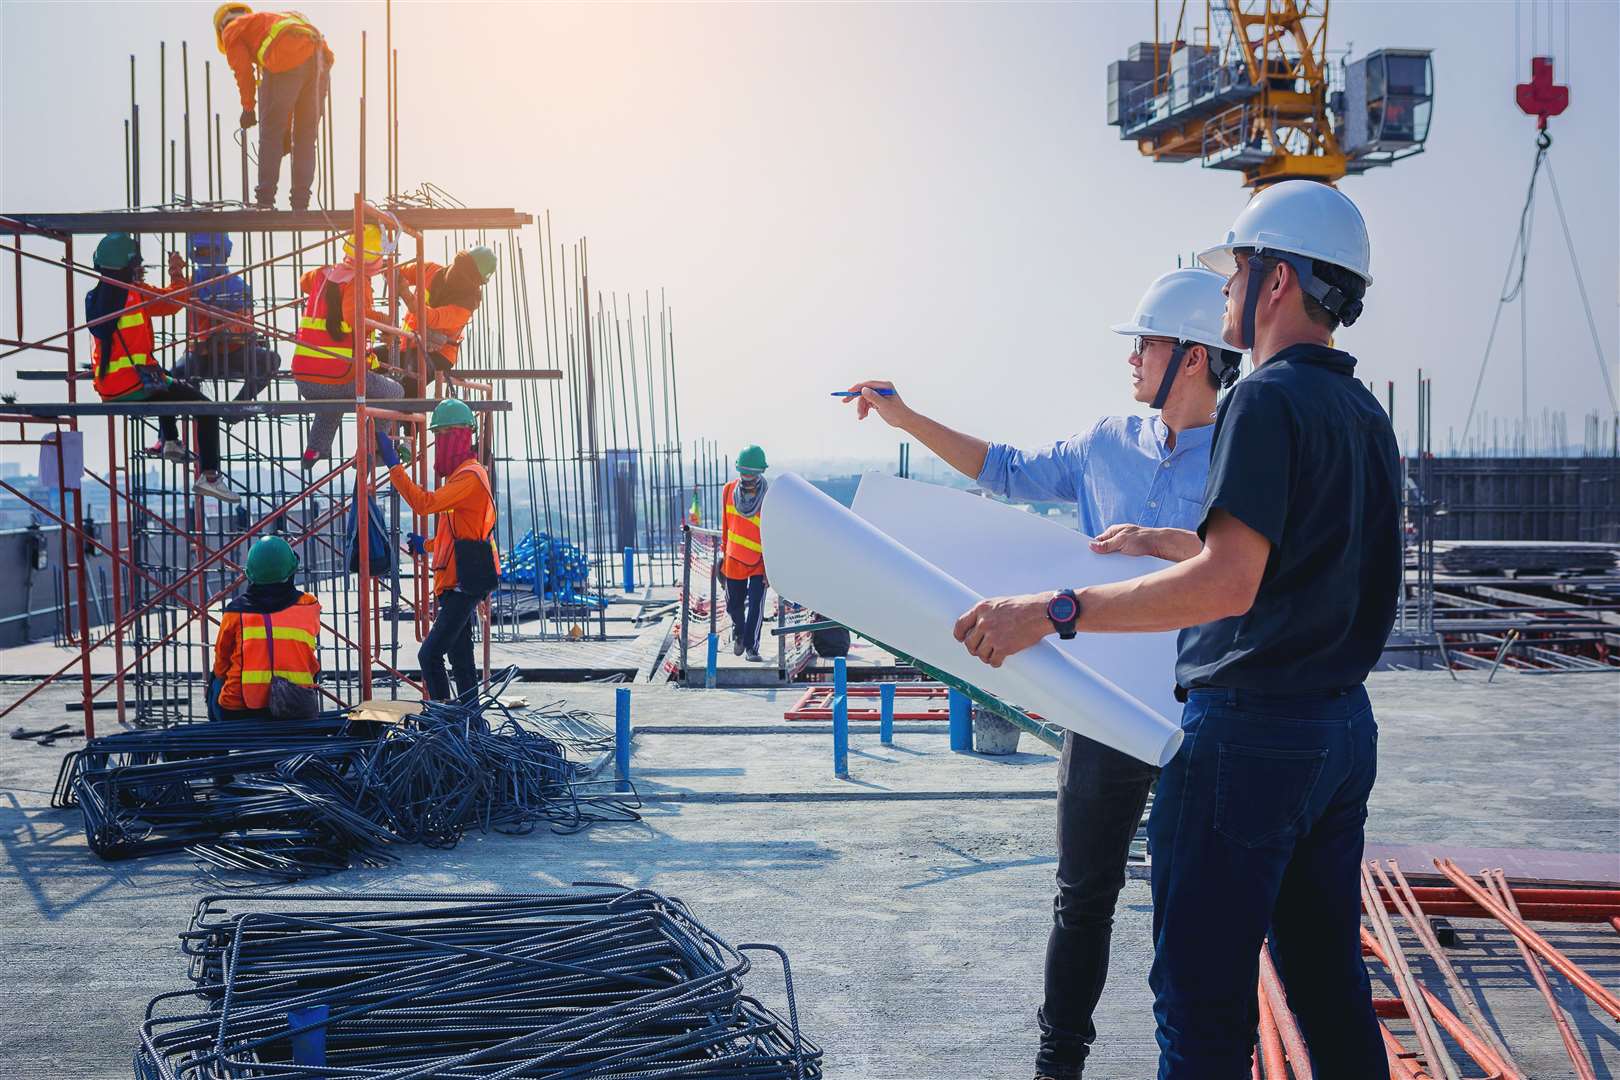 Structural engineer and architect working with blueprints discuss at the outdoors construction site. (44278006)